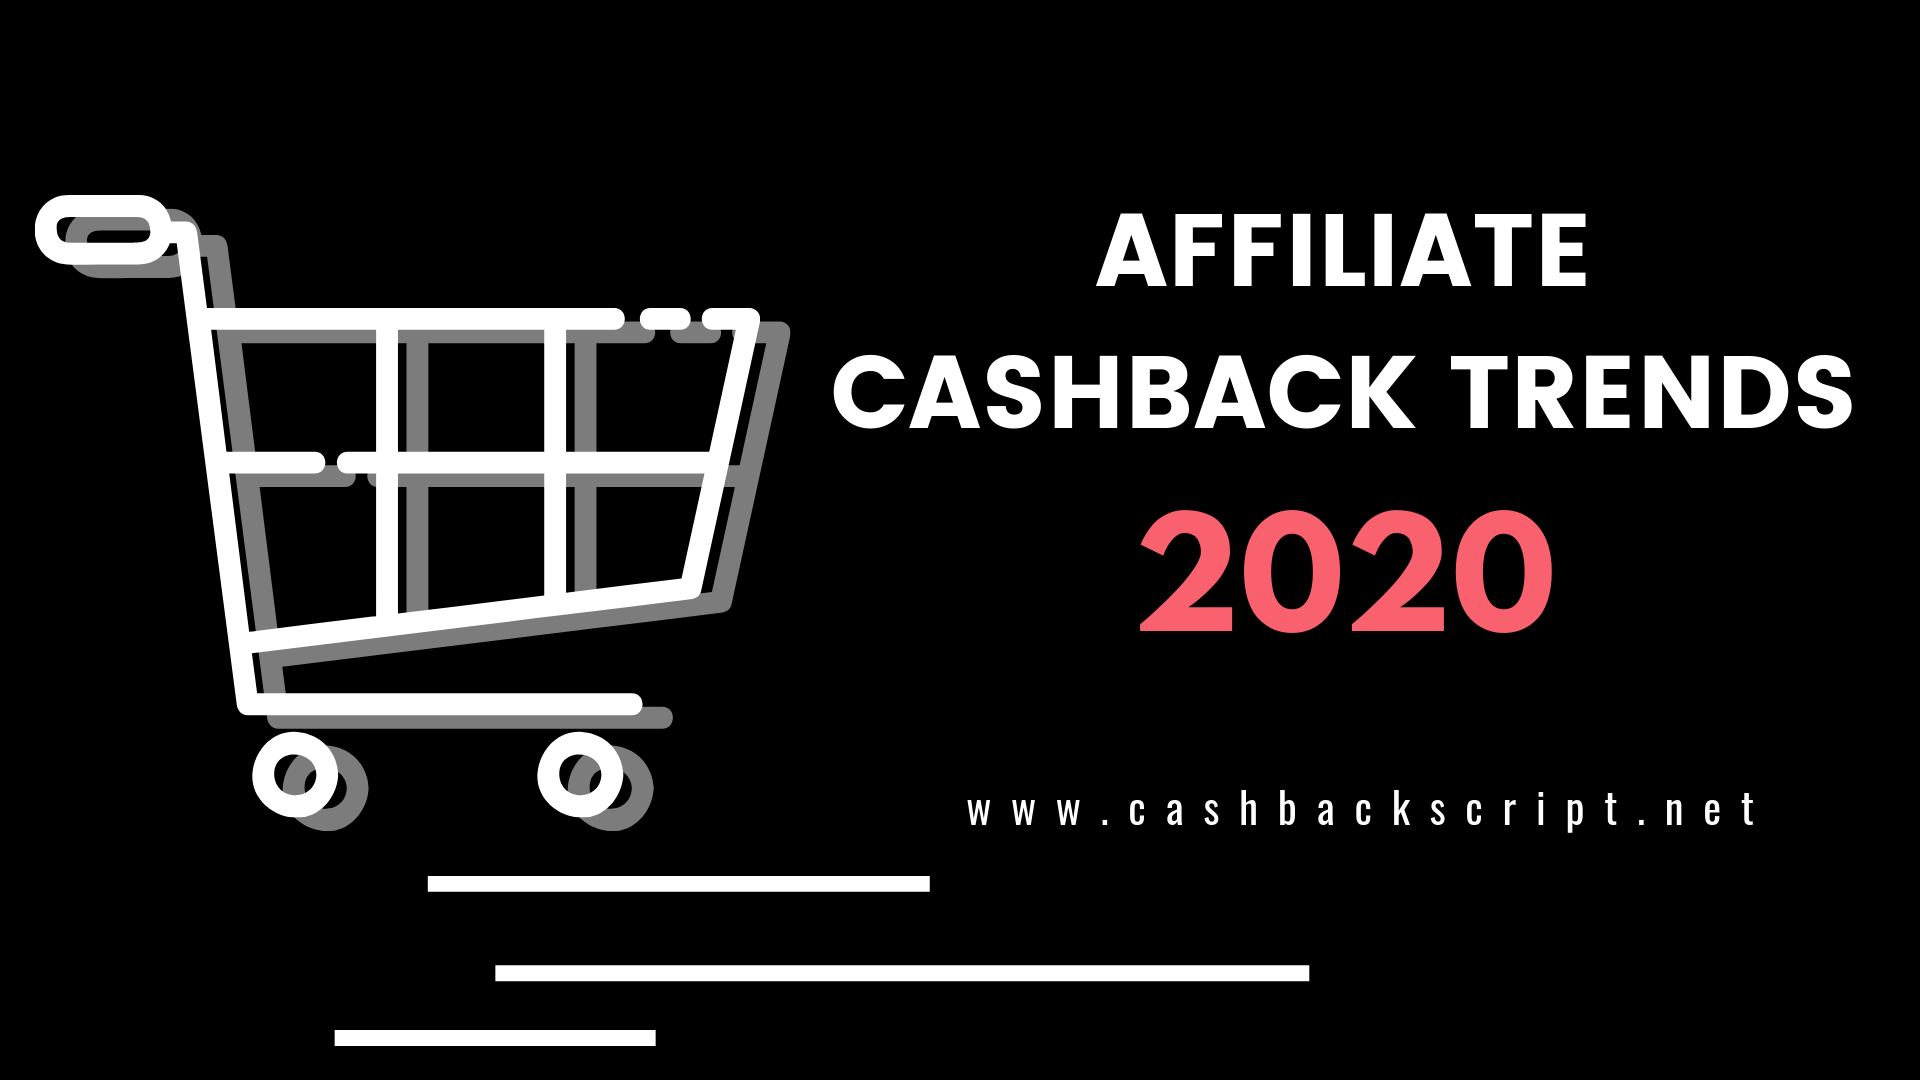 Top 5 Affiliate Cashback Business Trends to Boost your Revenue in 2020